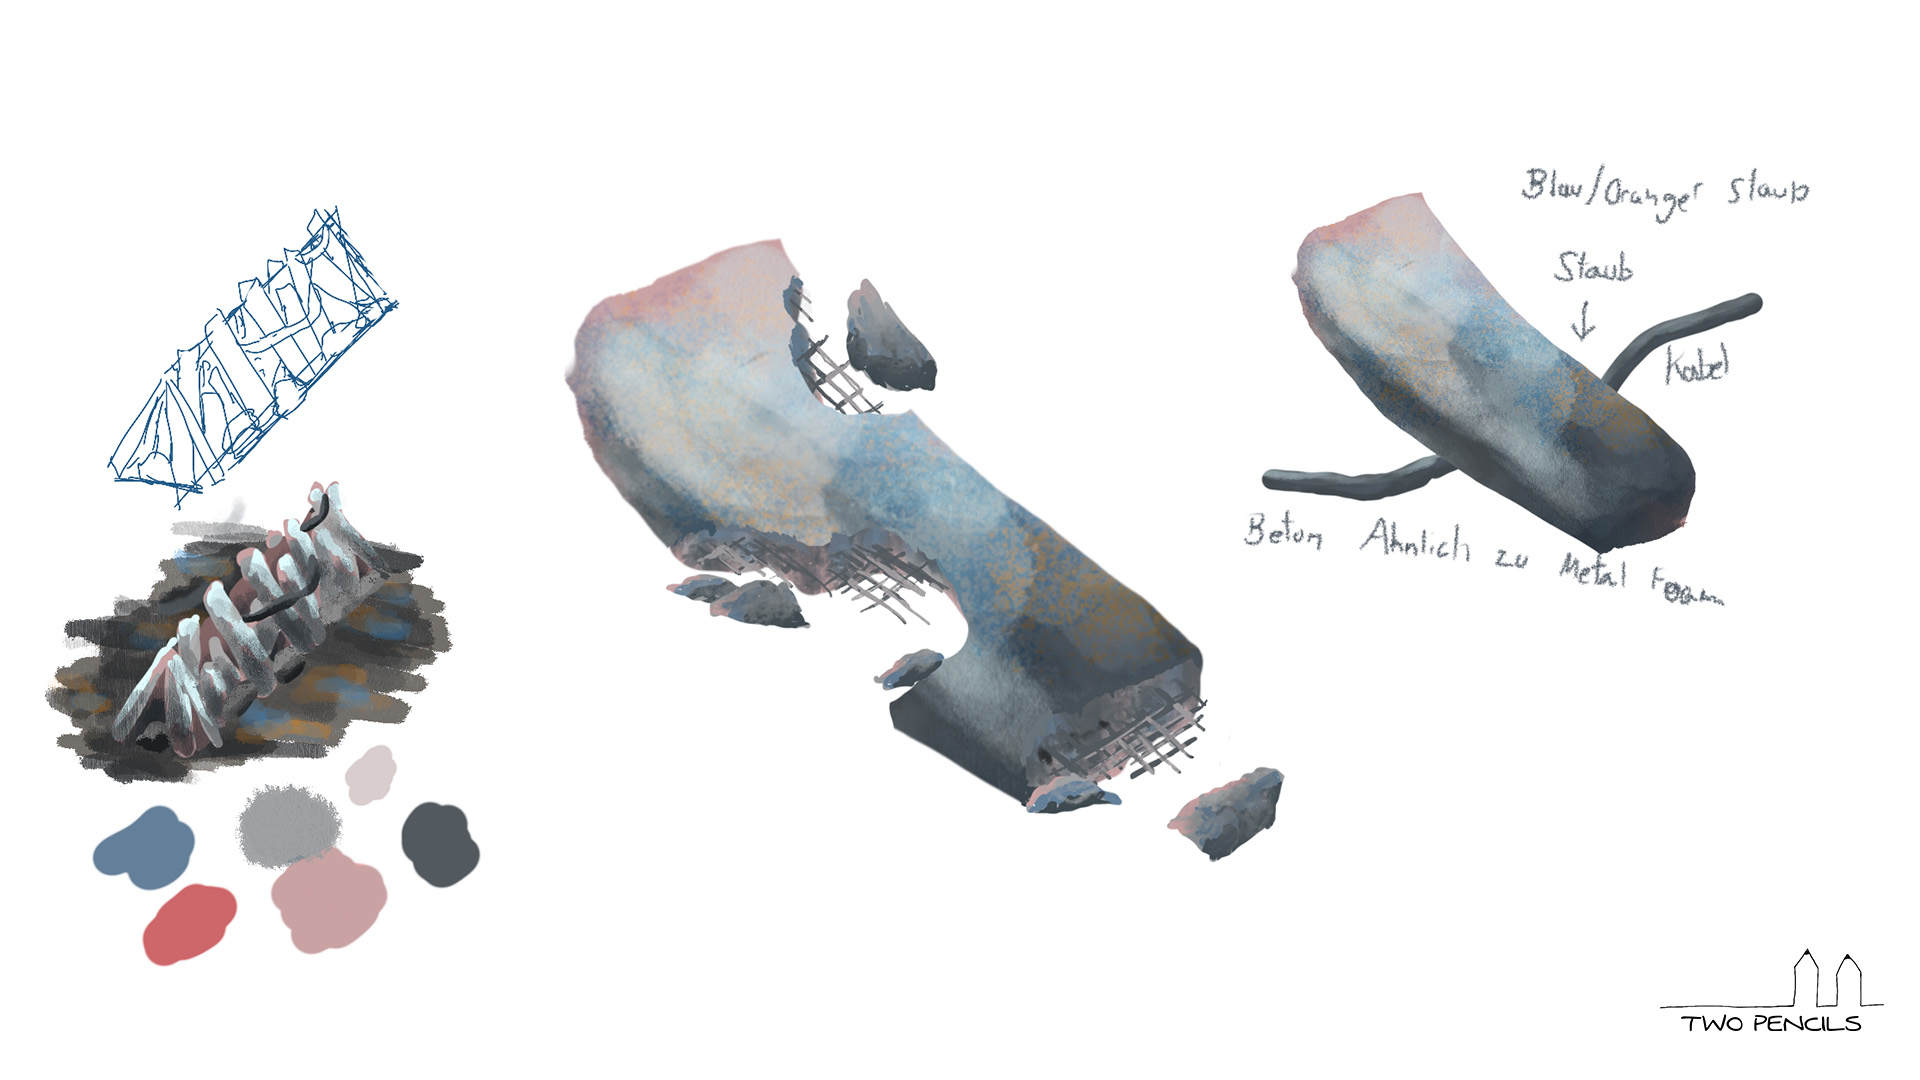 Concept of a wall made of debris.